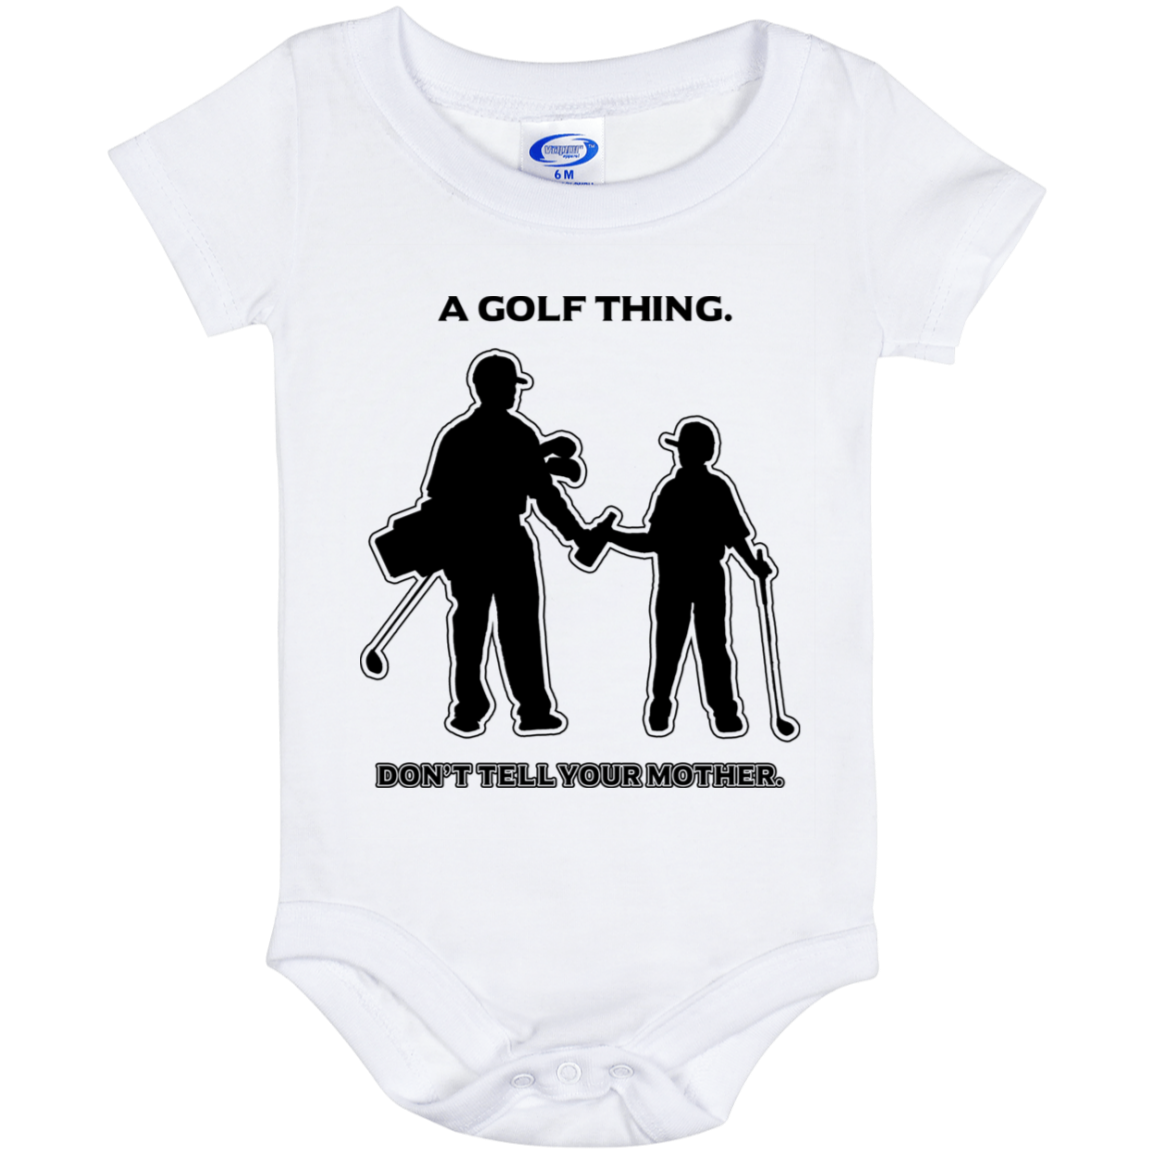 OPG Custom Design #7. Father and Son's First Beer. Don't Tell Your Mother. Baby Onesie 6 Month